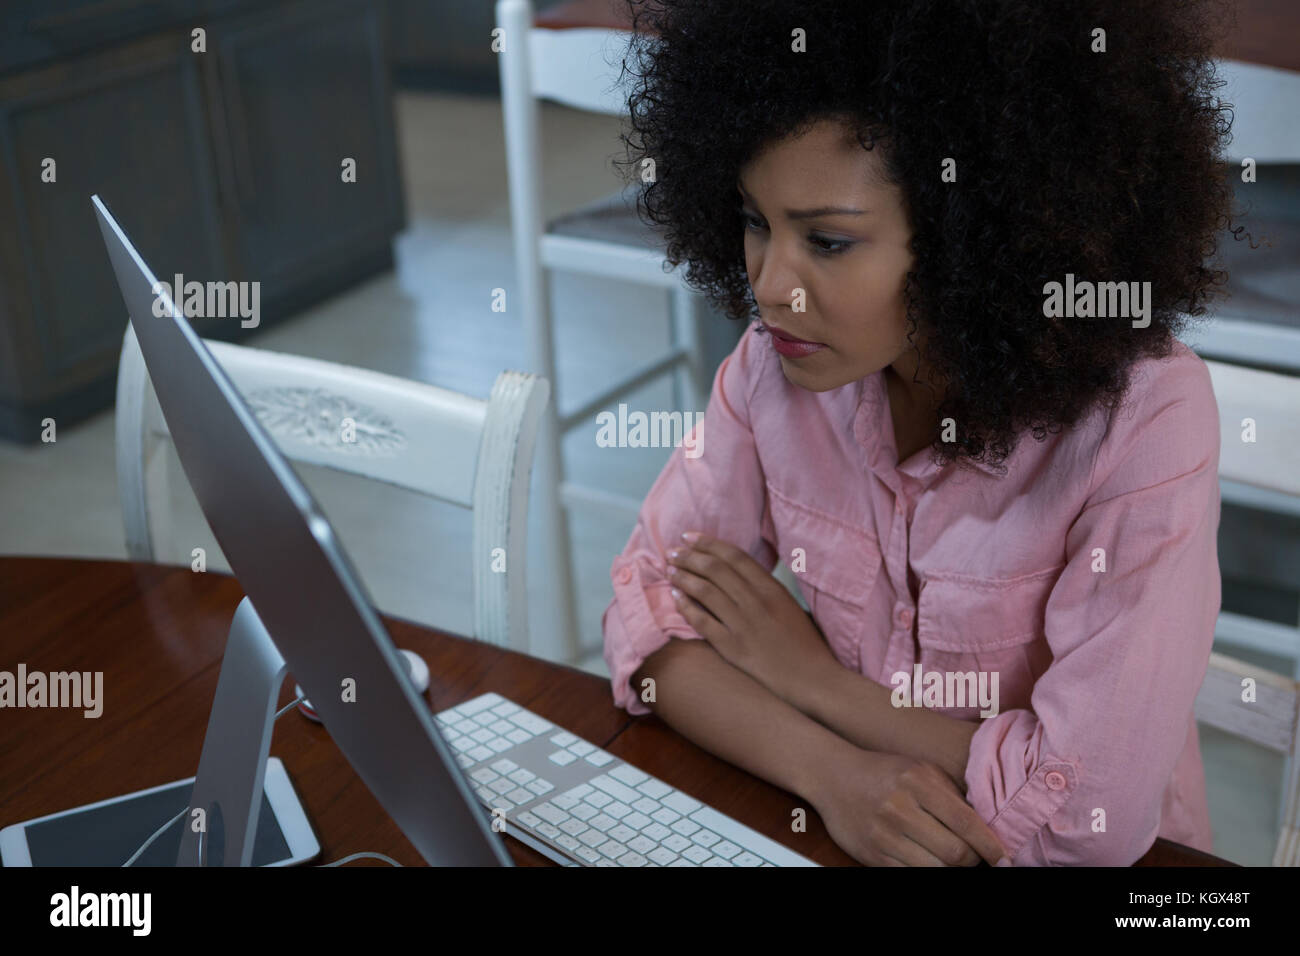 Young woman using computer at home Stock Photo